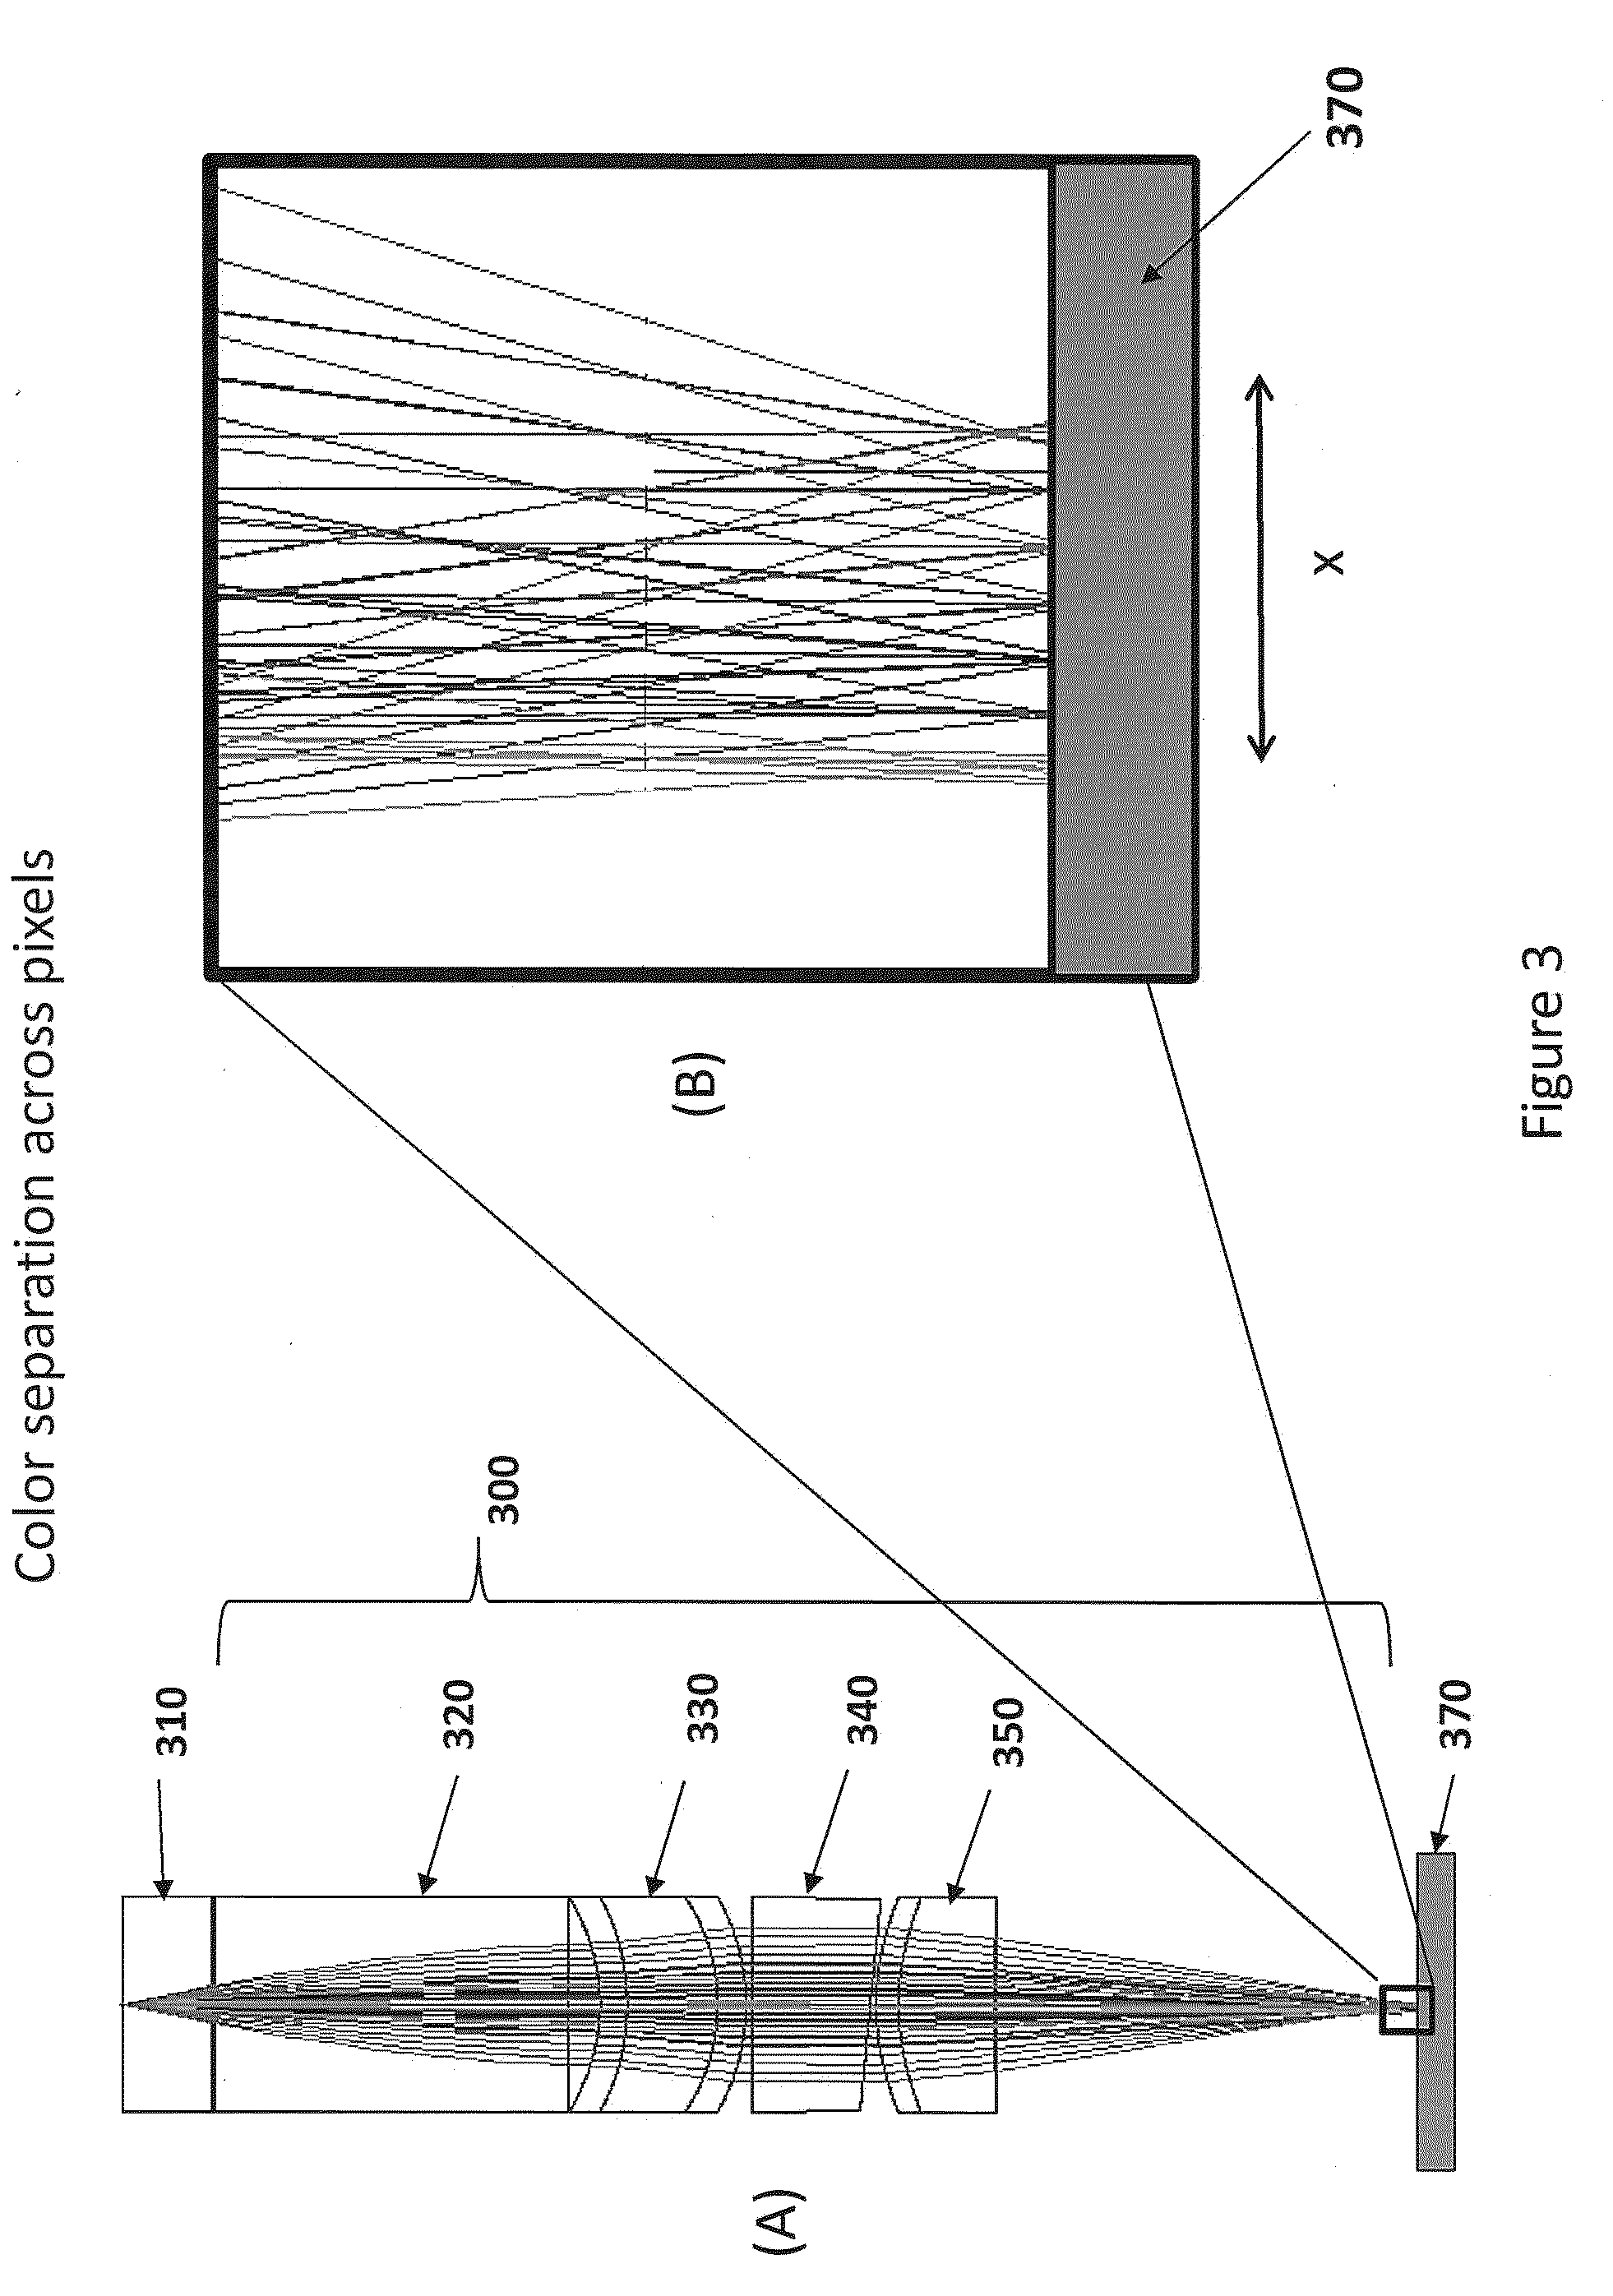 Analytical devices having compact lens train arrays